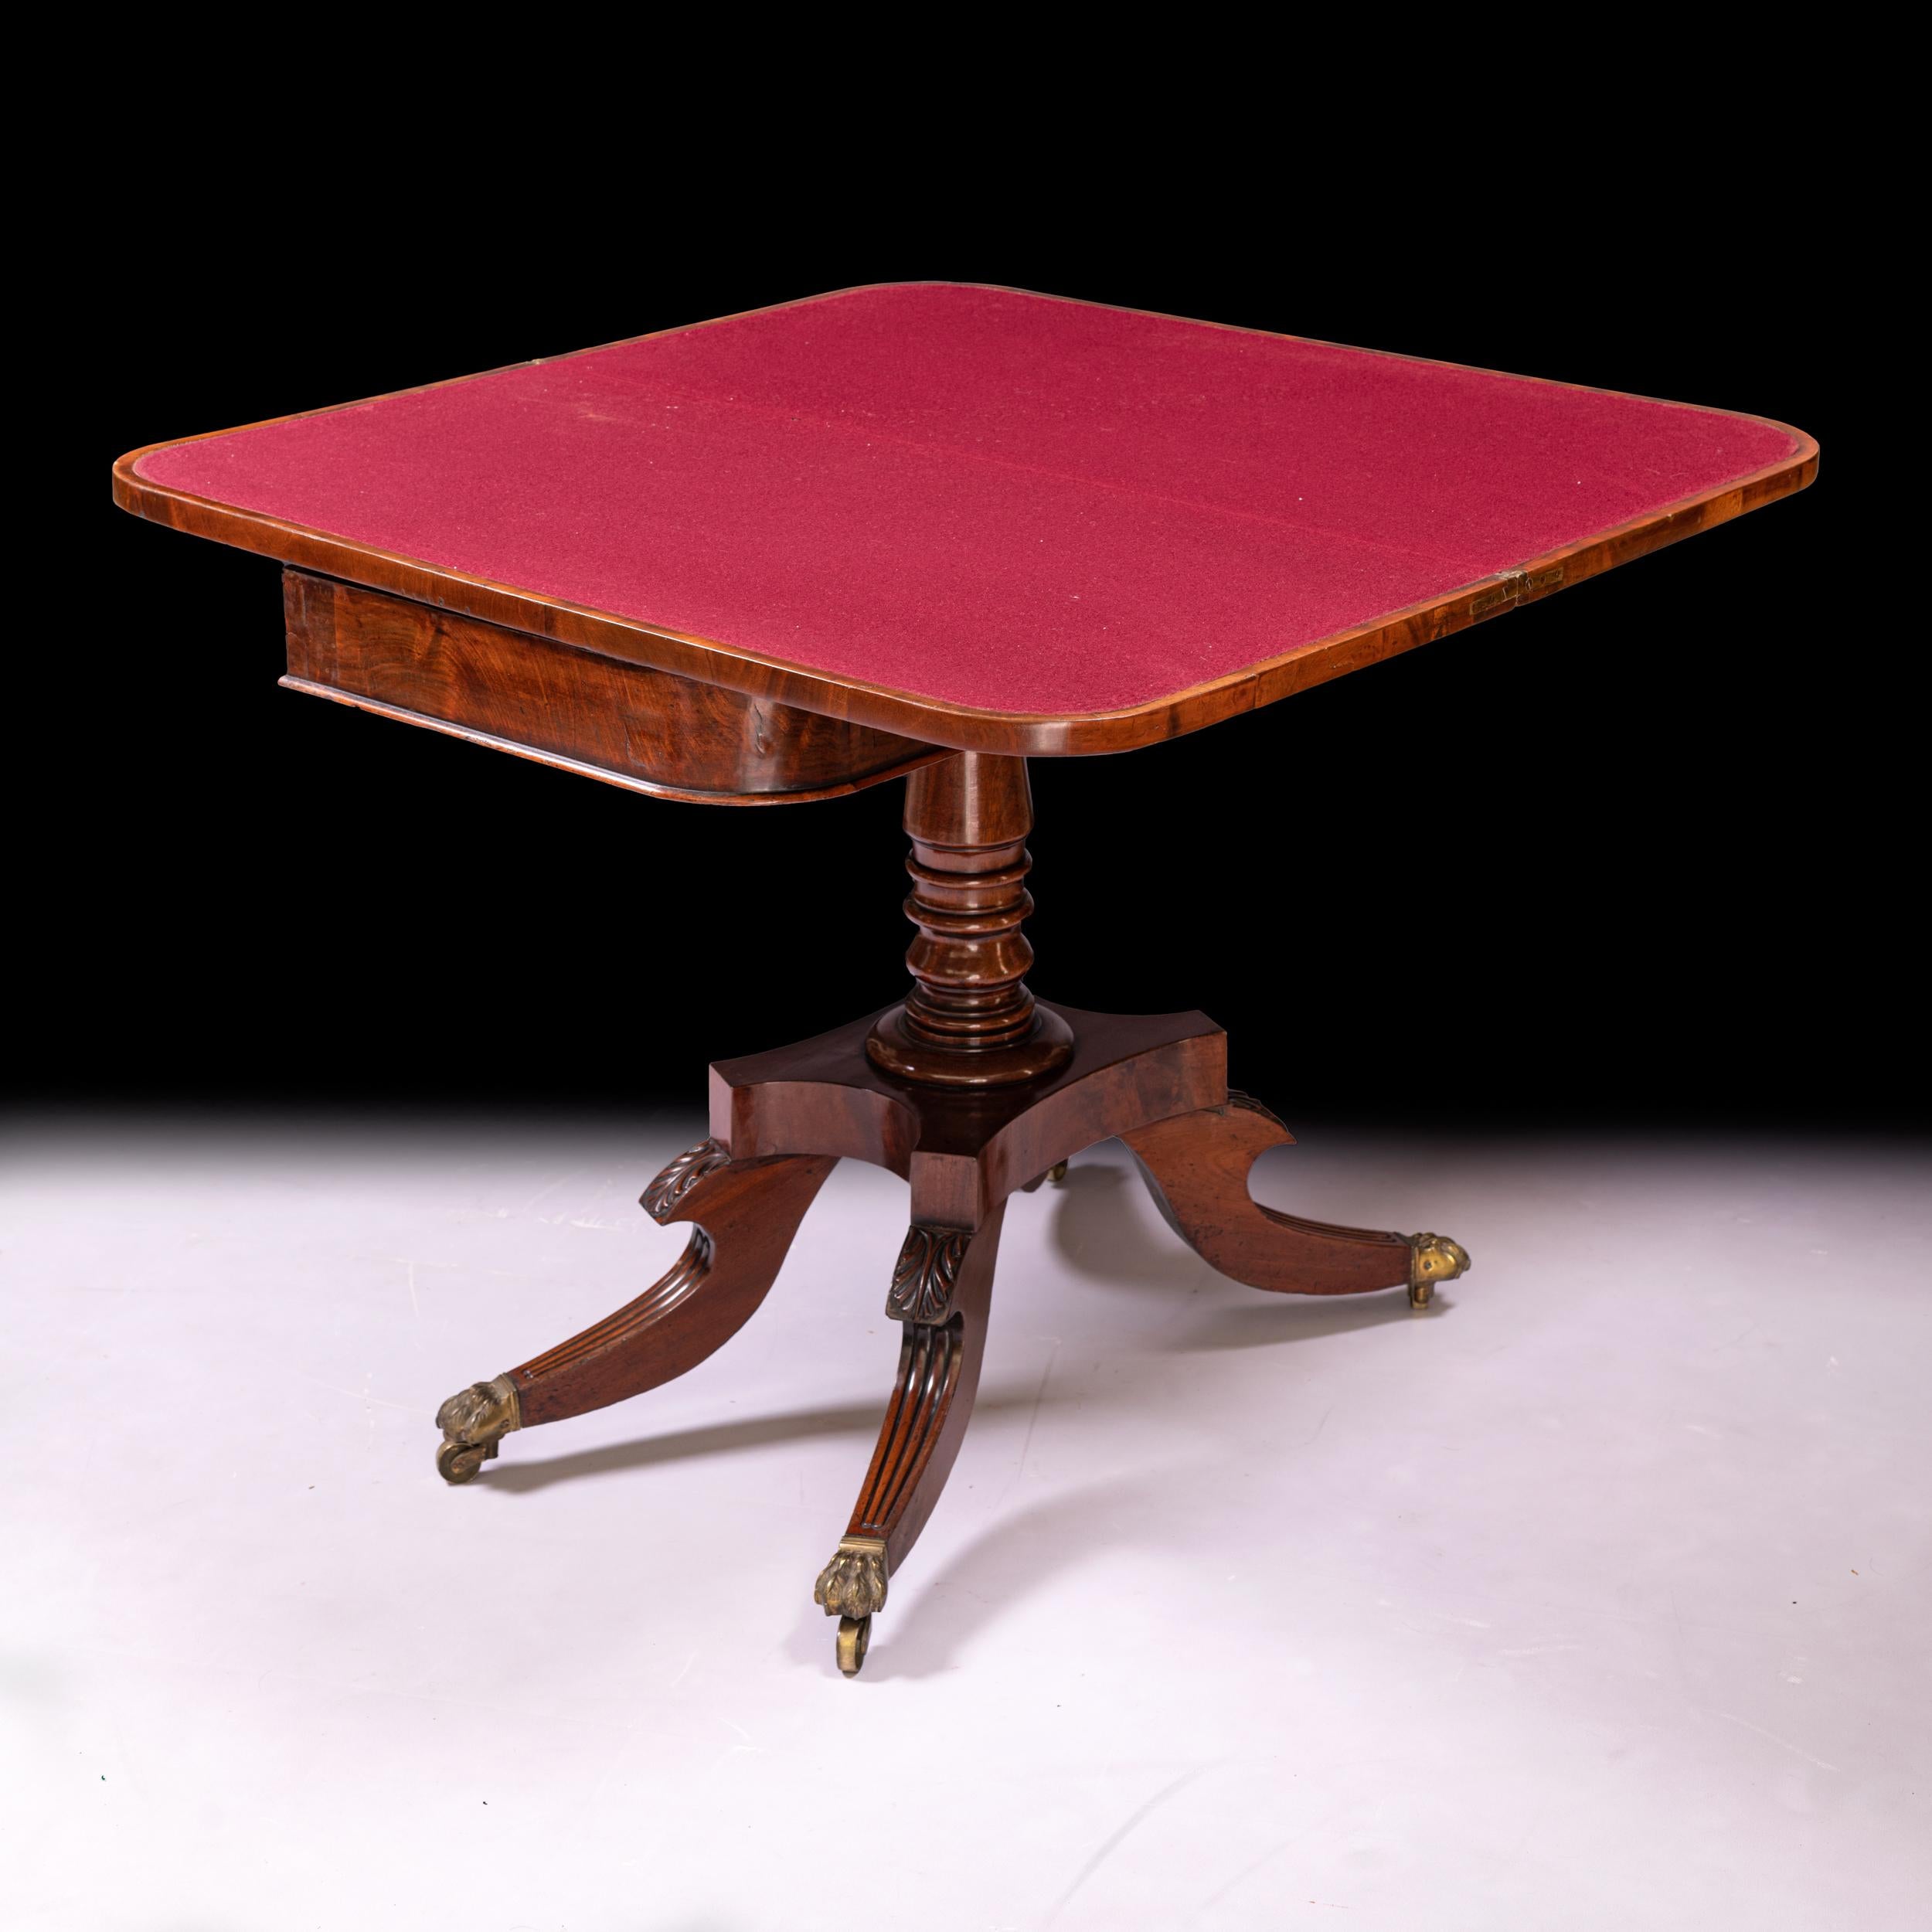 Pair Of Early 19th Century Irish Regency Turnover Card/Games Tables For Sale 6